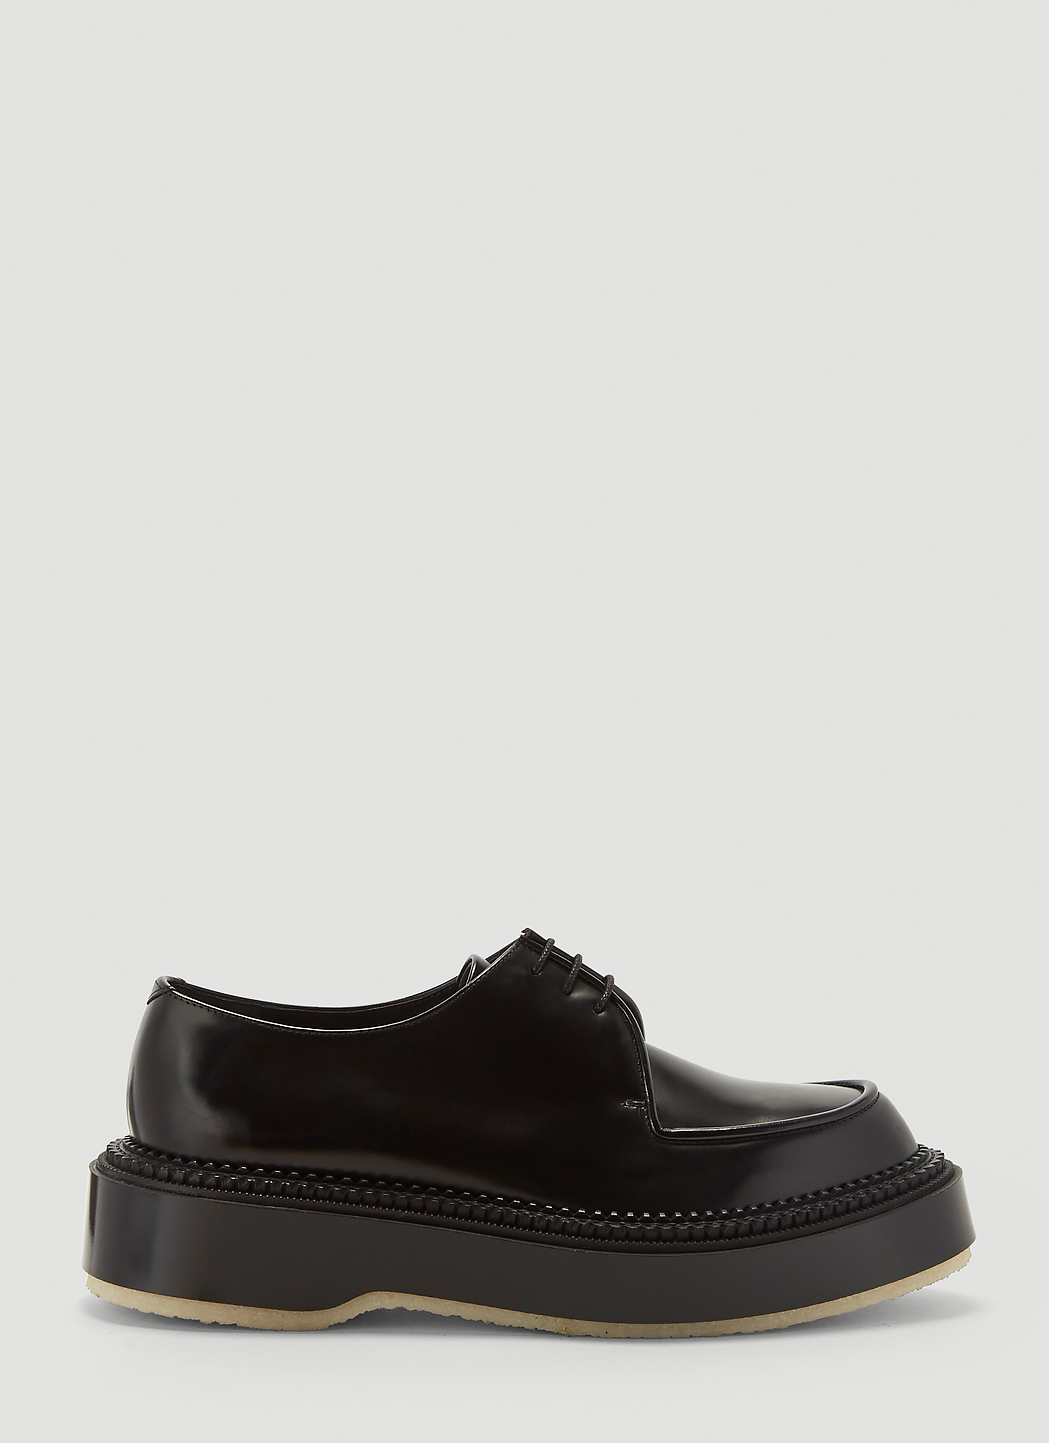 X Undercover Type 54C Mirror Derby Shoes